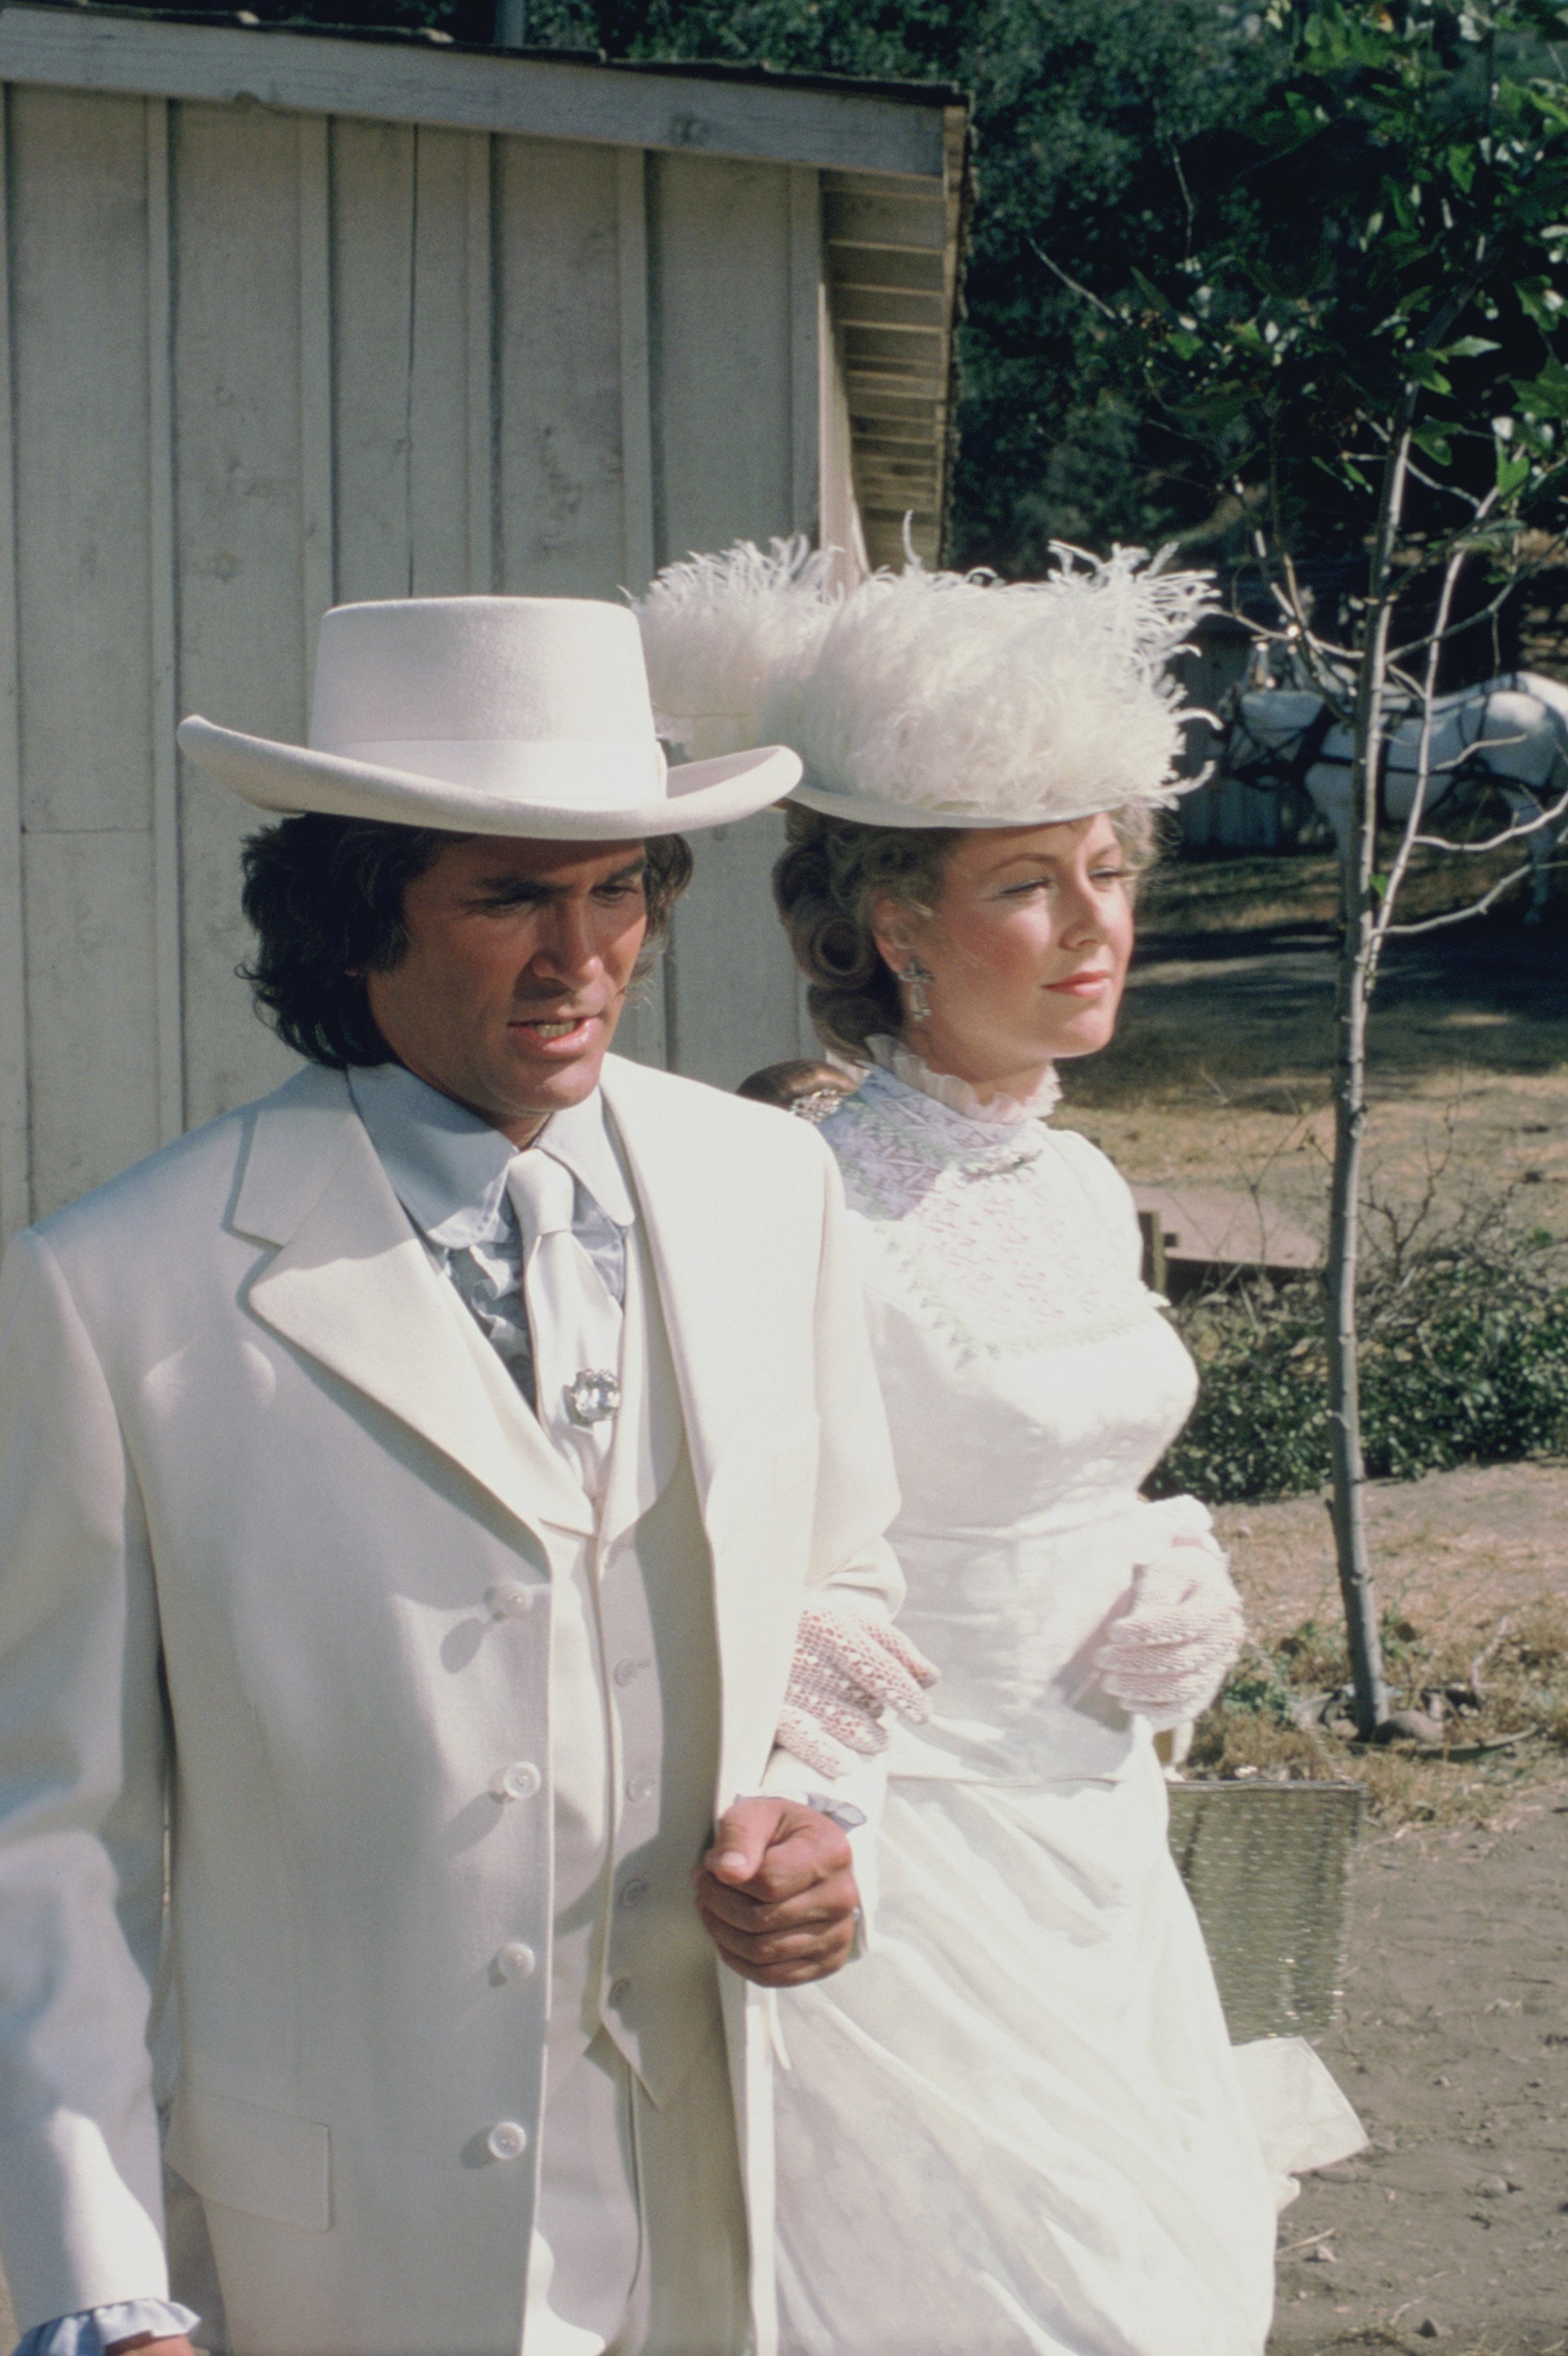 Michael Landon as Charles Philip Ingalls and Karen Grassle as Caroline Quiner Holbrook Ingalls in "Little House on the Prairie" on December 10, 1975 | Source: Getty Images